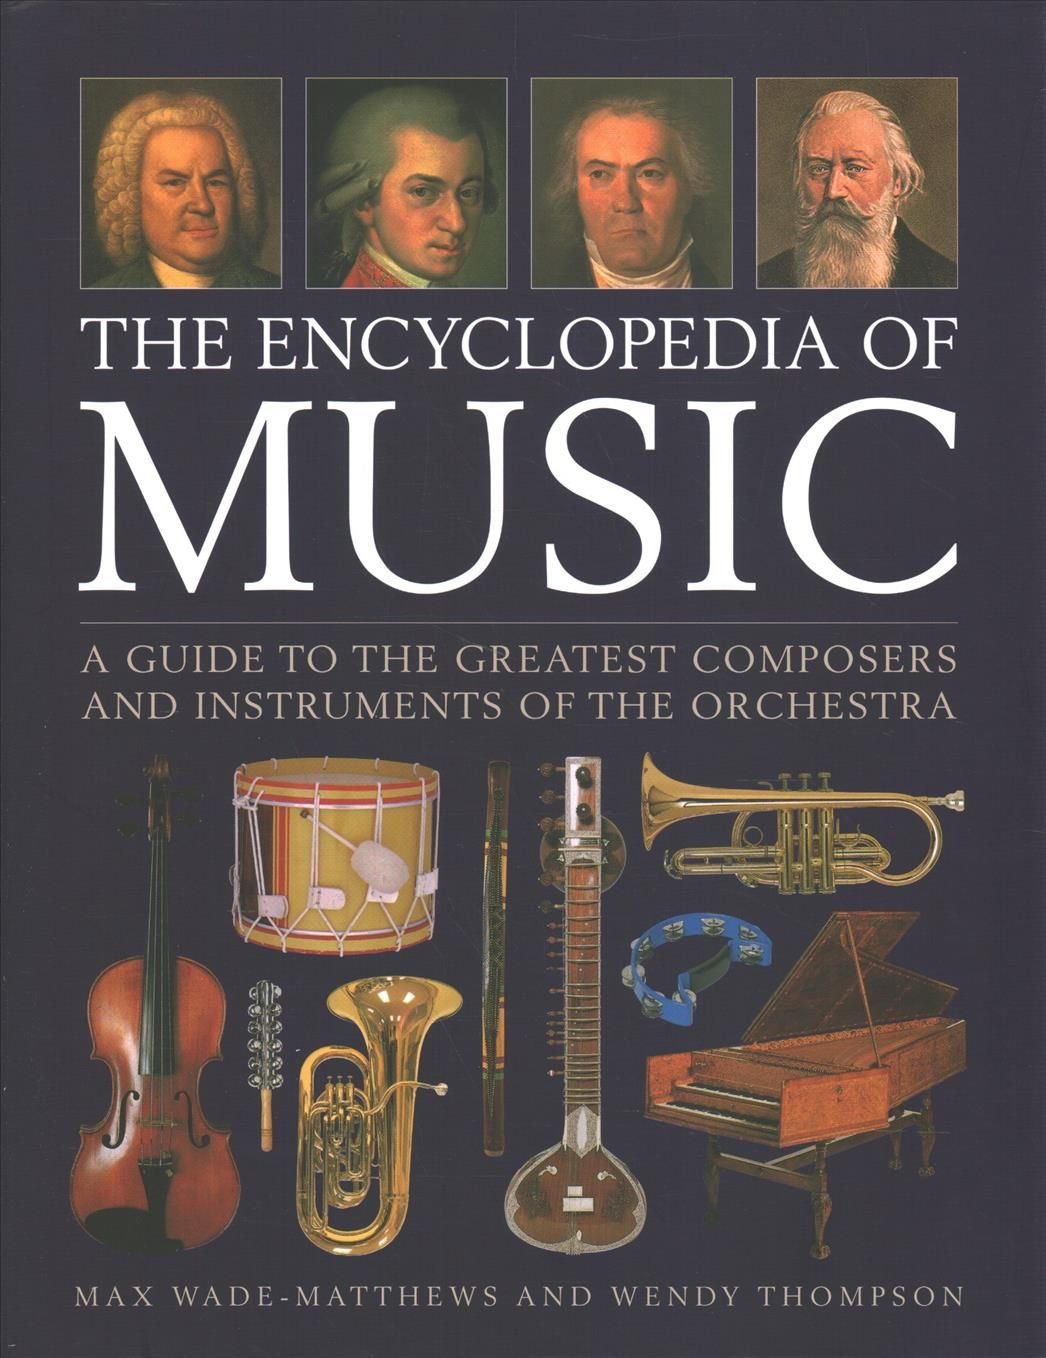 Music, The Encyclopedia of